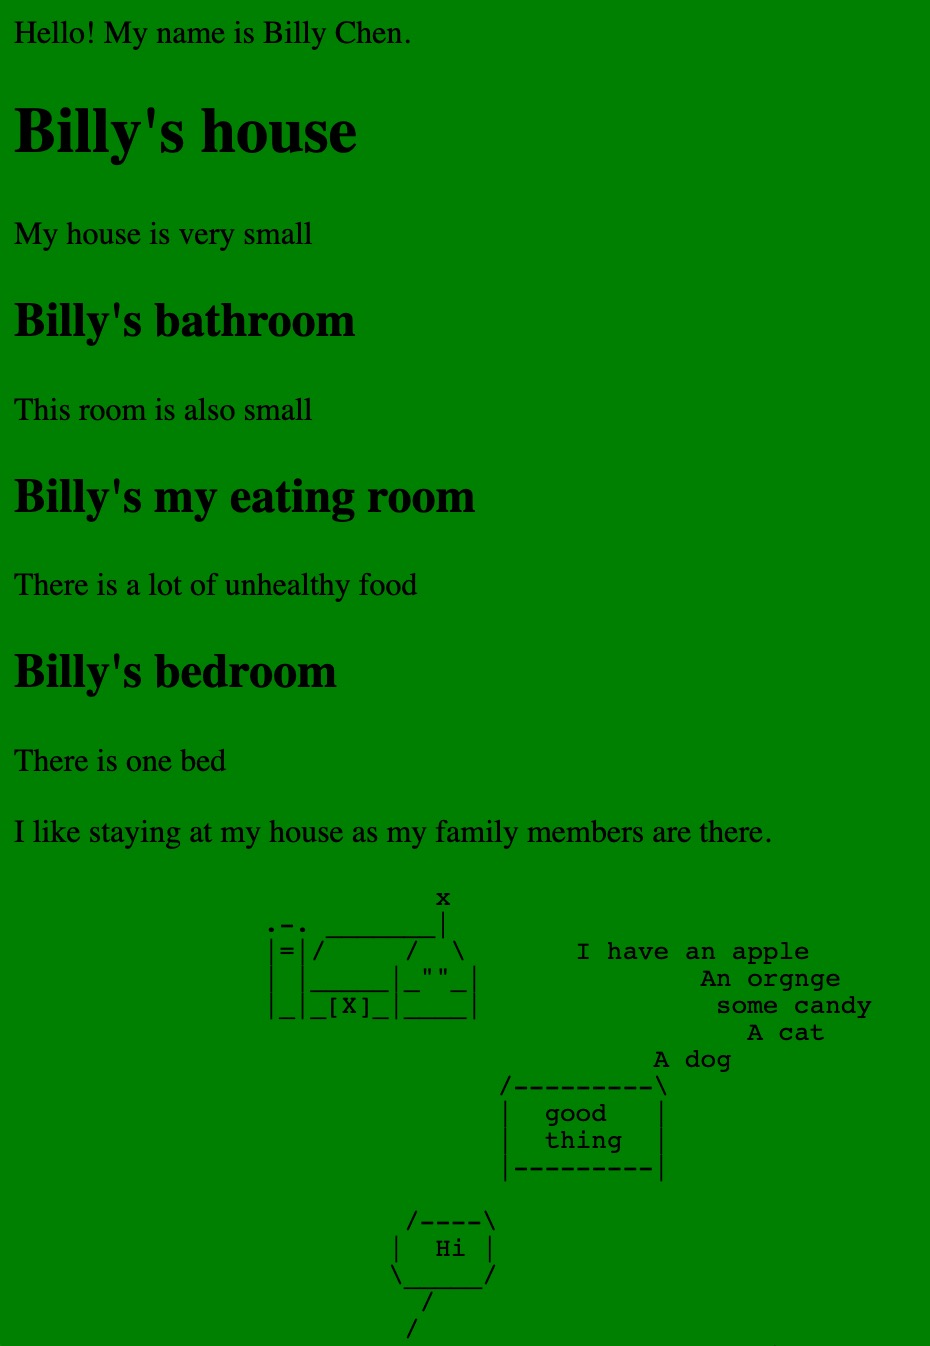 One of the students, Billy Chen's work where he created an HTML webpage using different size headers and ASCII design using pre-formatted text. The website has a green background.